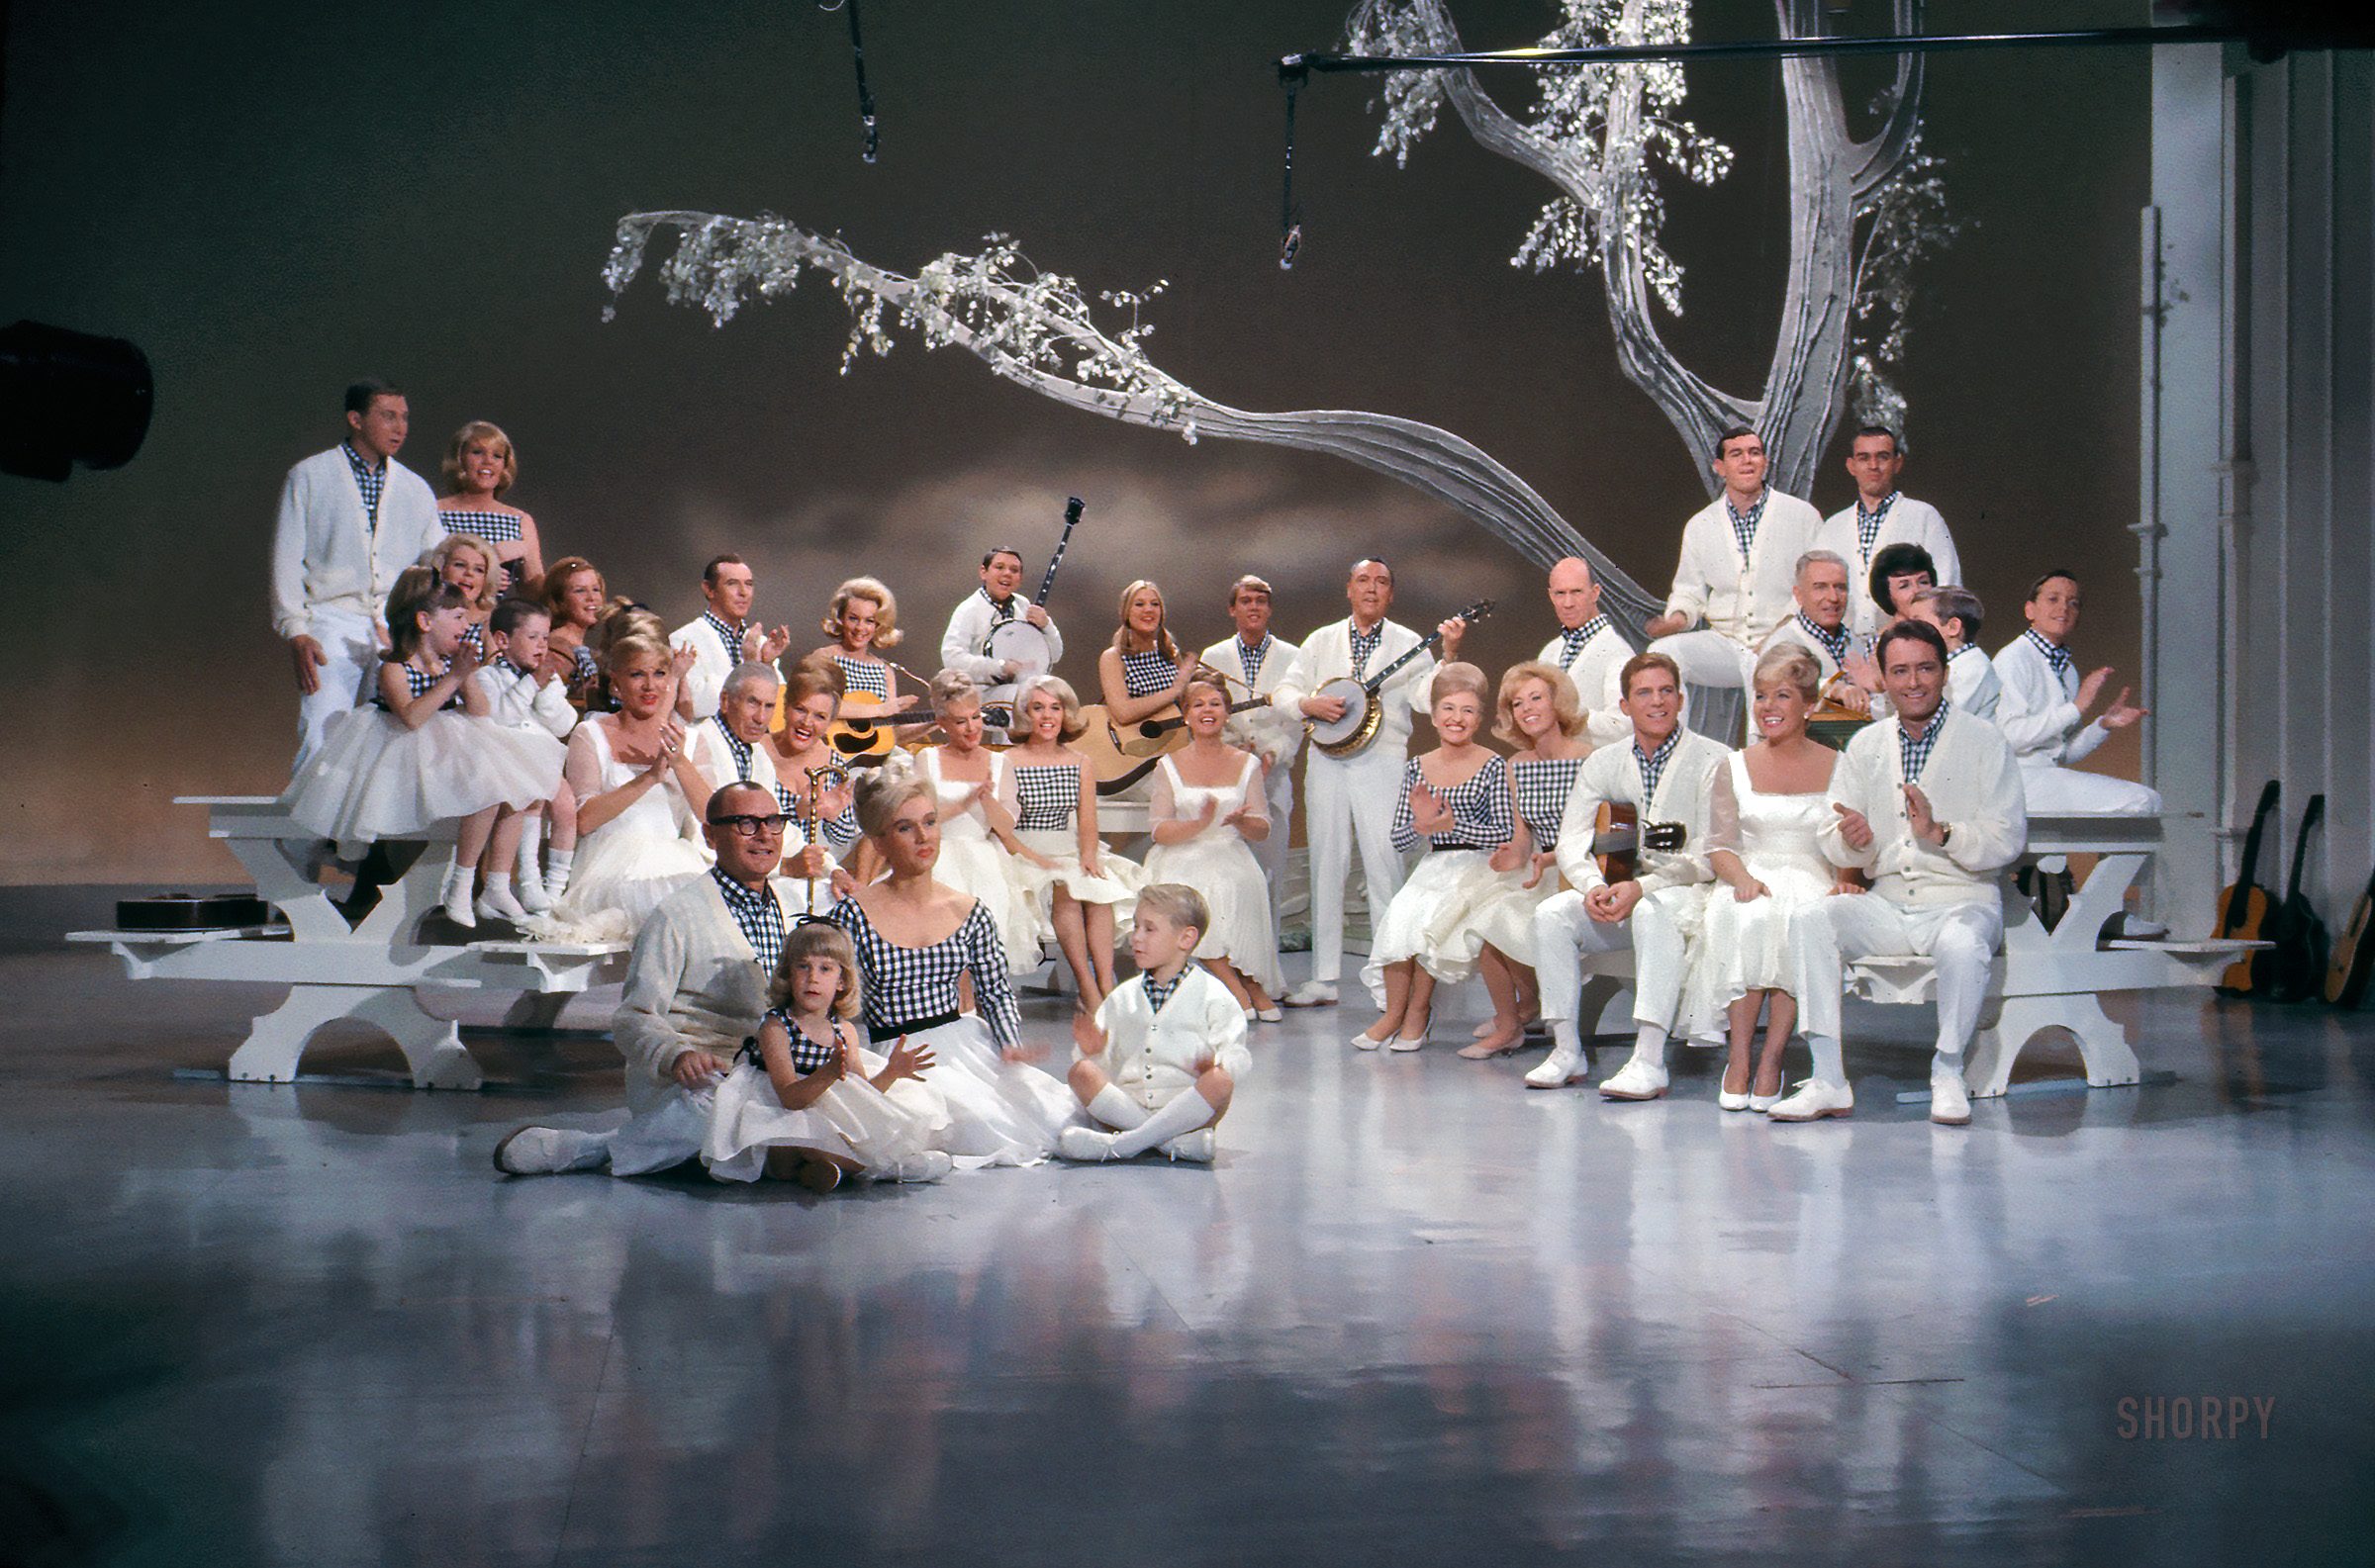 March 1965. "The King Family -- including the King Sisters, King Kiddies and King Cousins  -- with actor Robert Clarke and others on the set of the ABC-TV musical variety series The King Family." 35mm Kodachrome transparency by John Vachon for Look magazine. View full size.